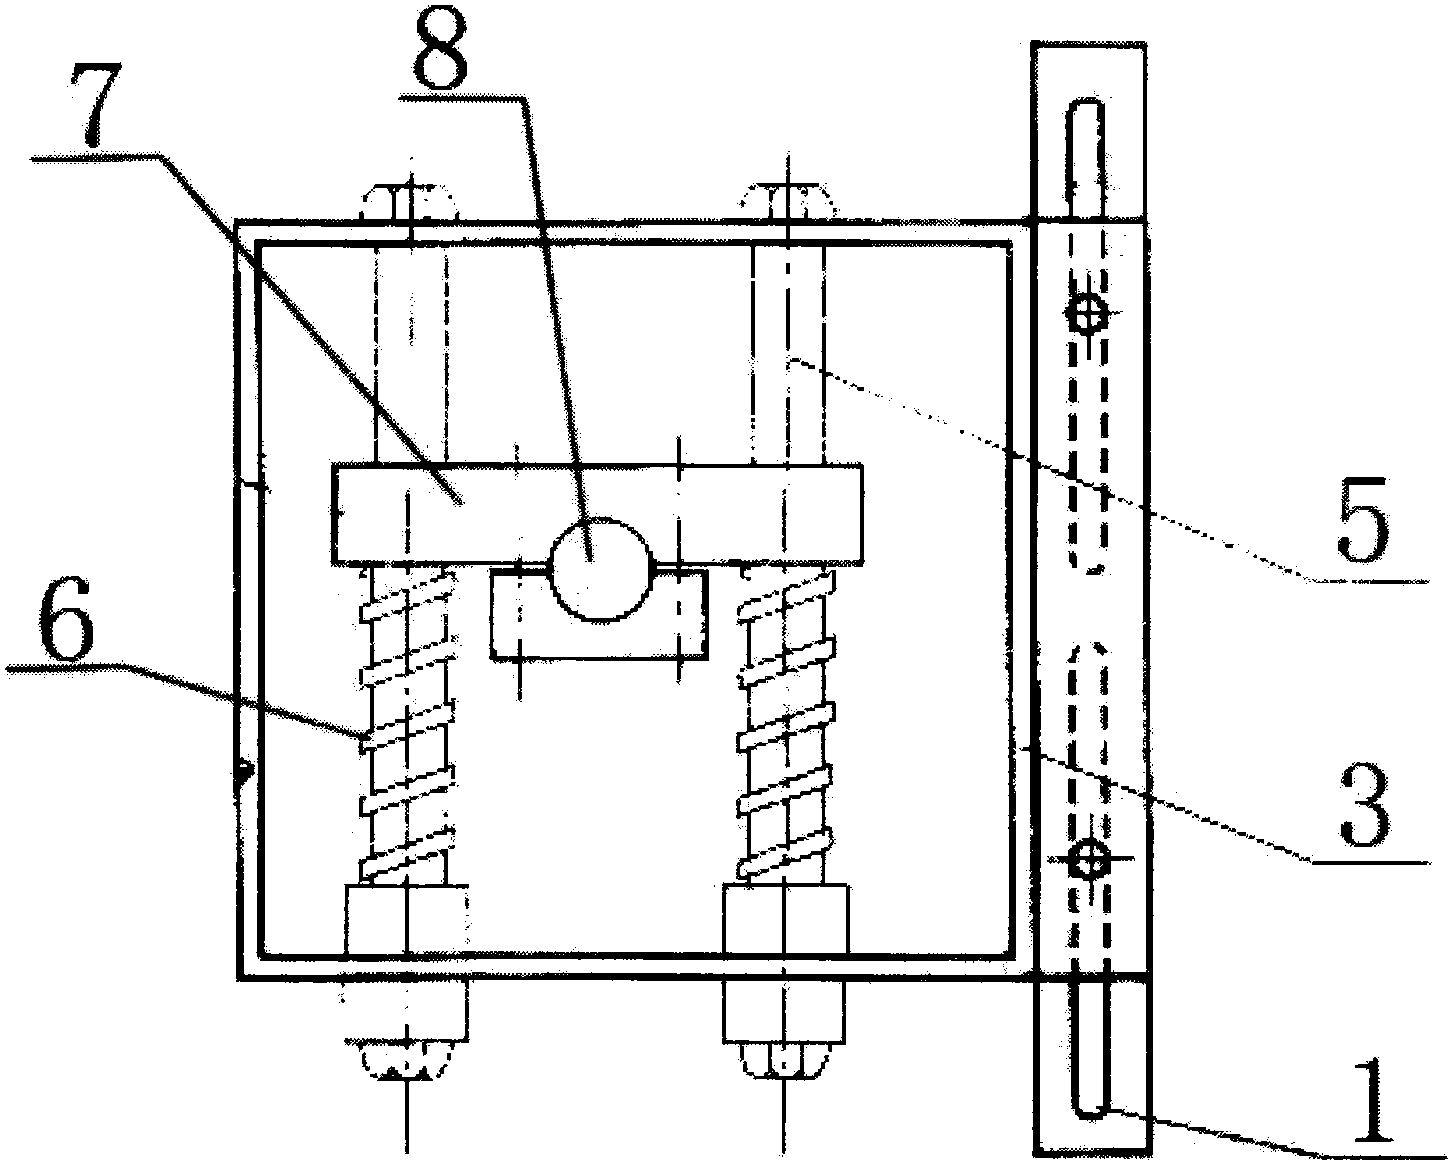 Novel conveying system with sweeping device